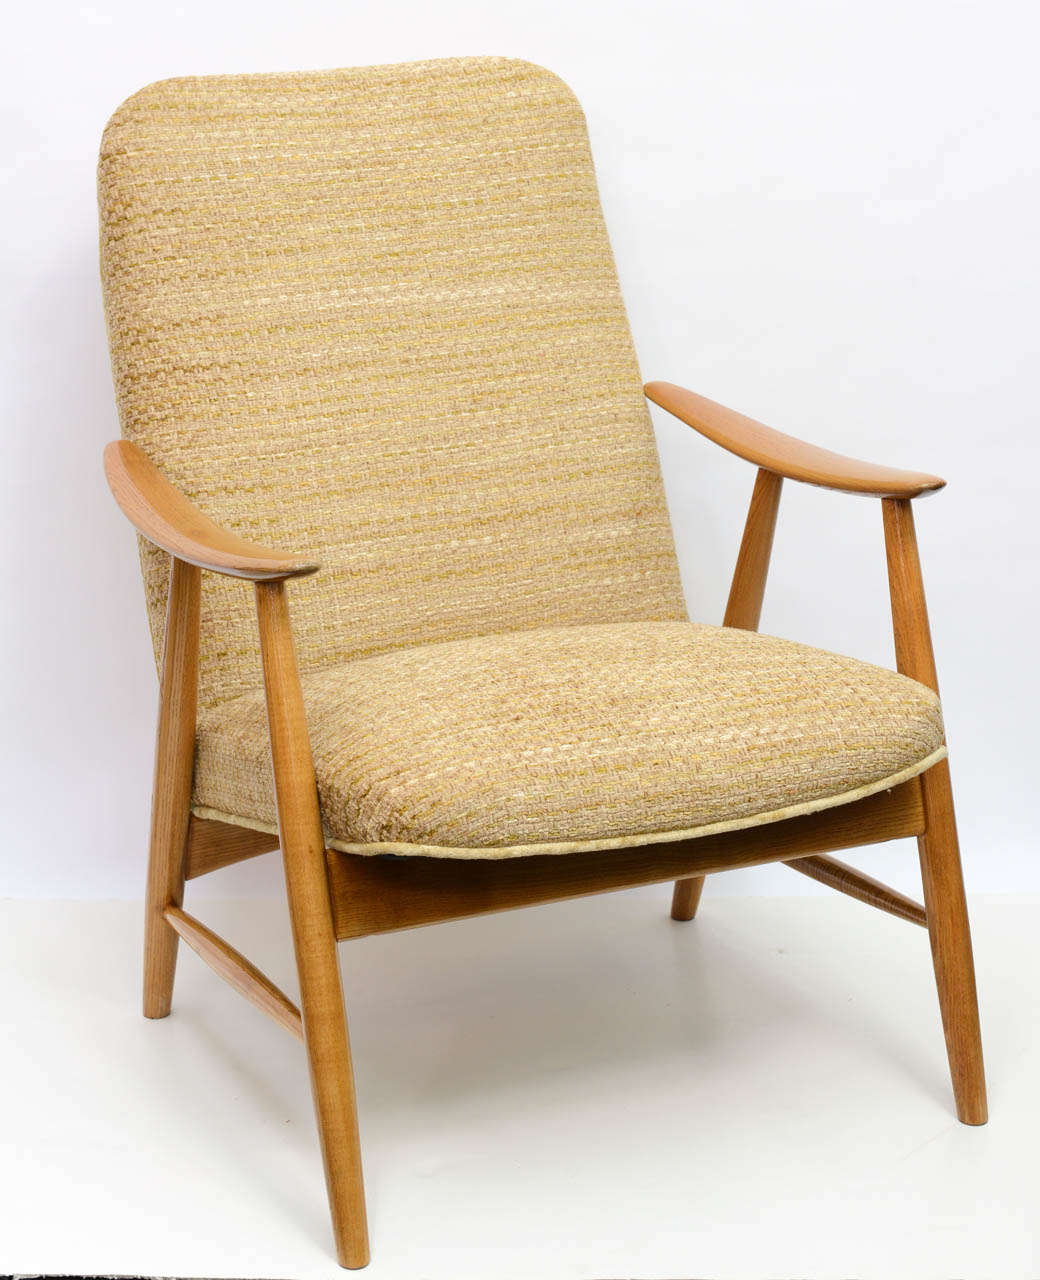 Swedish Pair of Mid-Century Modern Armchairs in a style of Juhl, Grete Jalk and Wegner